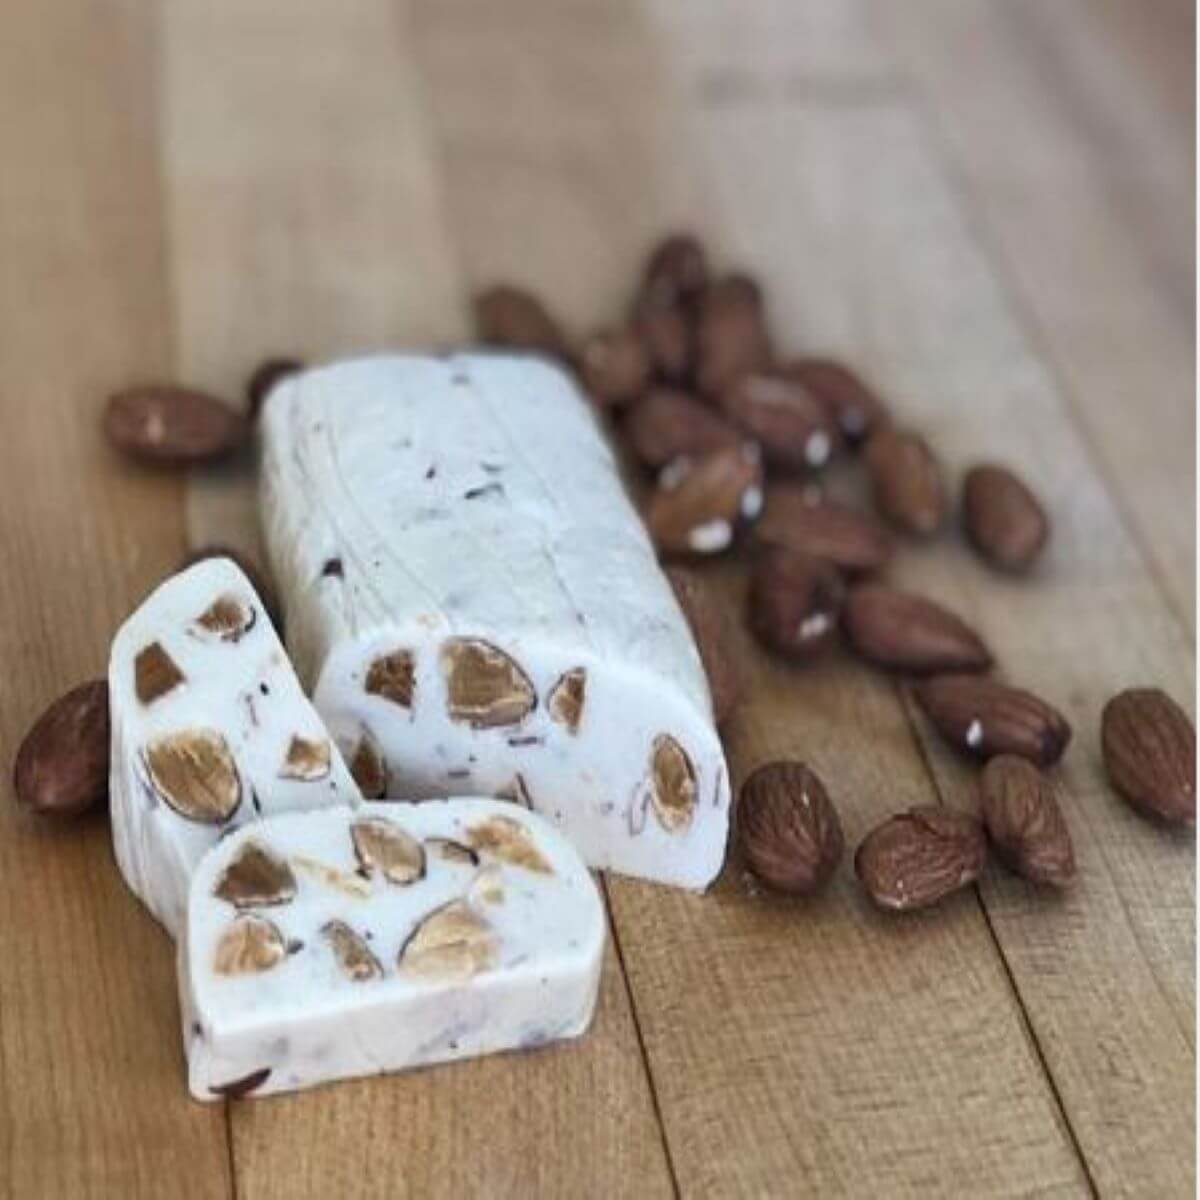 Roasted almond protein bar